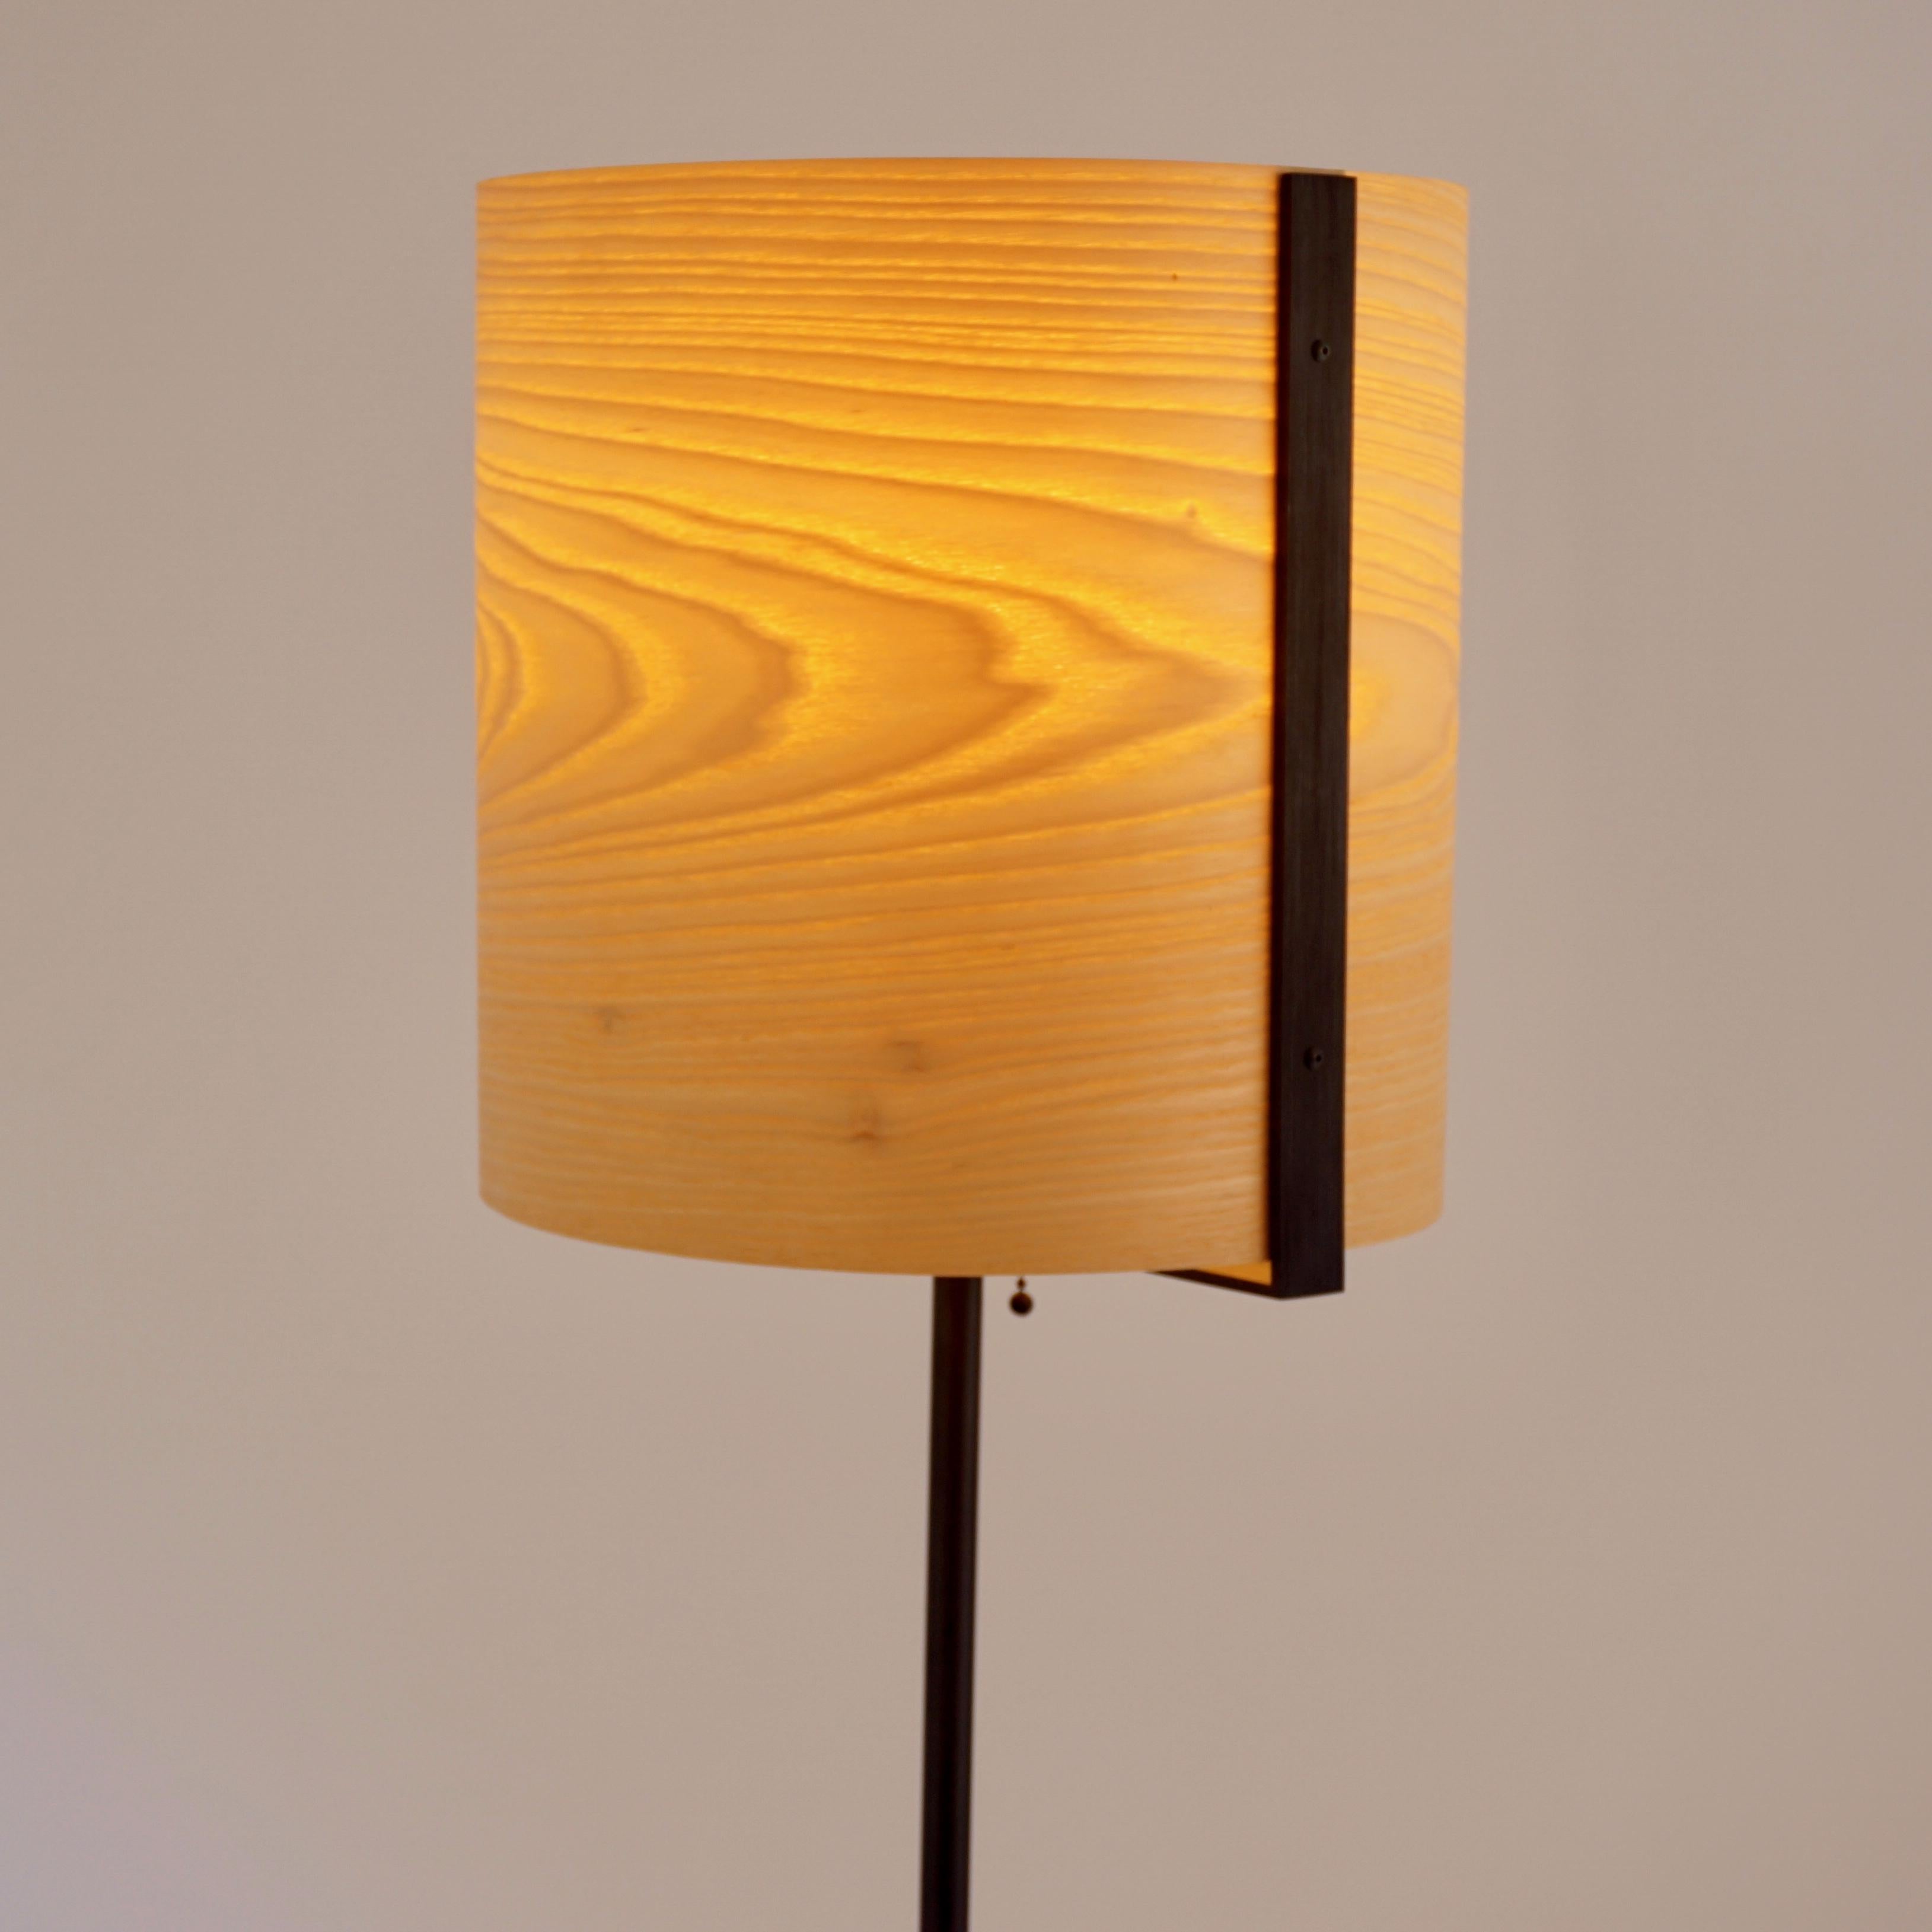 Ash Wood Veneer Floor Lamp #8 with Blackened Bronze Frame In New Condition For Sale In Bangall, NY